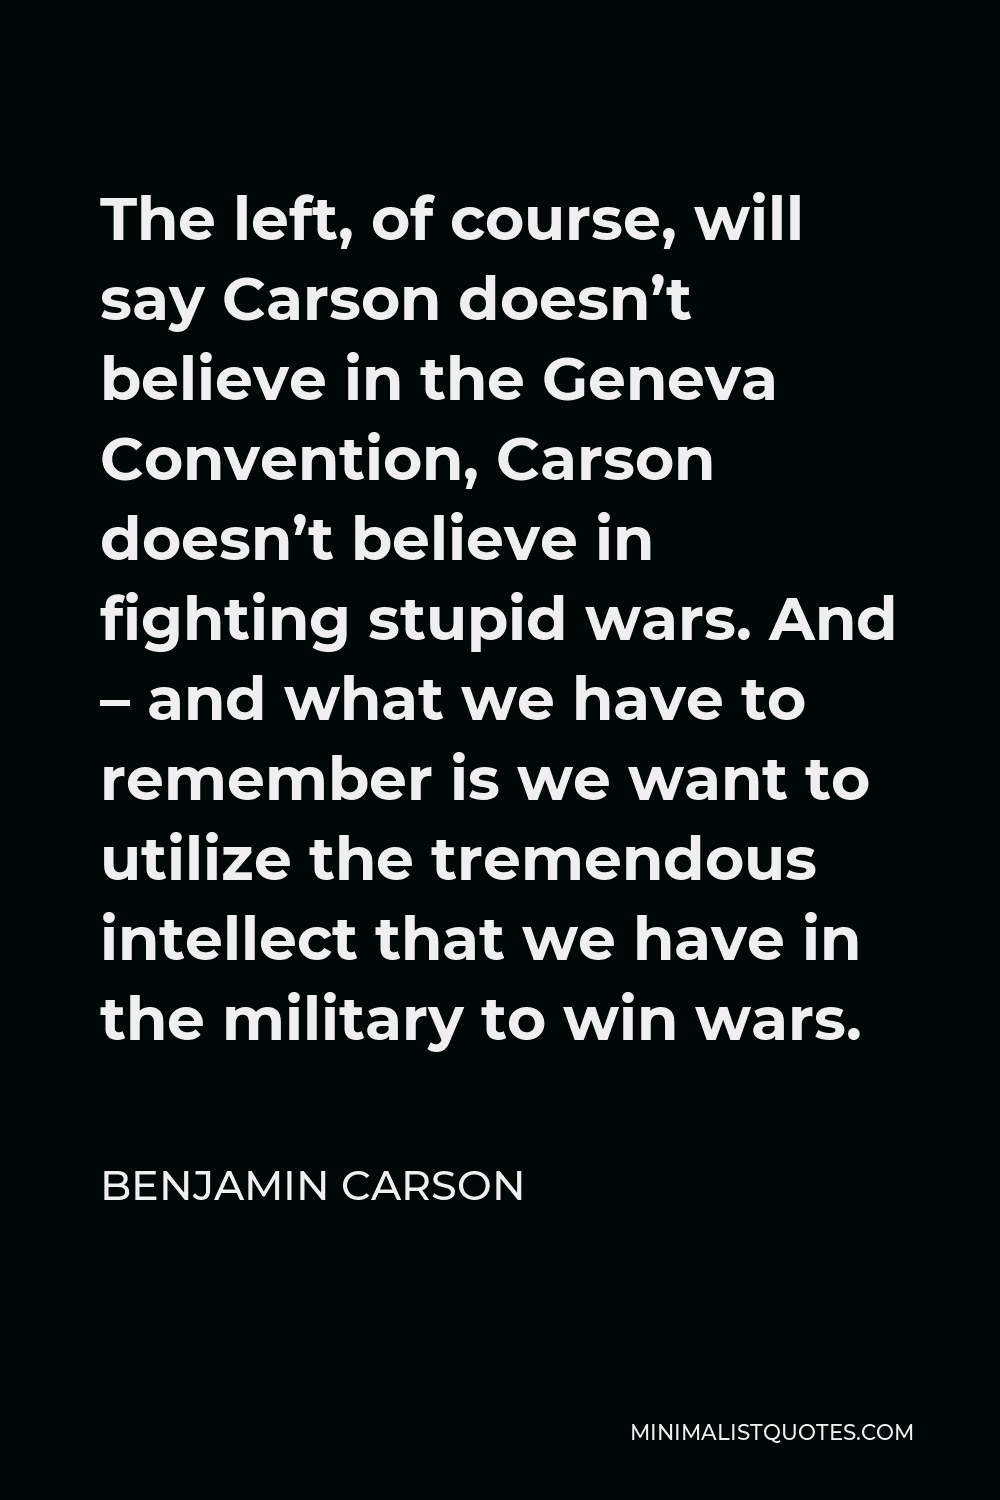 Benjamin Carson Quote - The left, of course, will say Carson doesn’t believe in the Geneva Convention, Carson doesn’t believe in fighting stupid wars. And – and what we have to remember is we want to utilize the tremendous intellect that we have in the military to win wars.